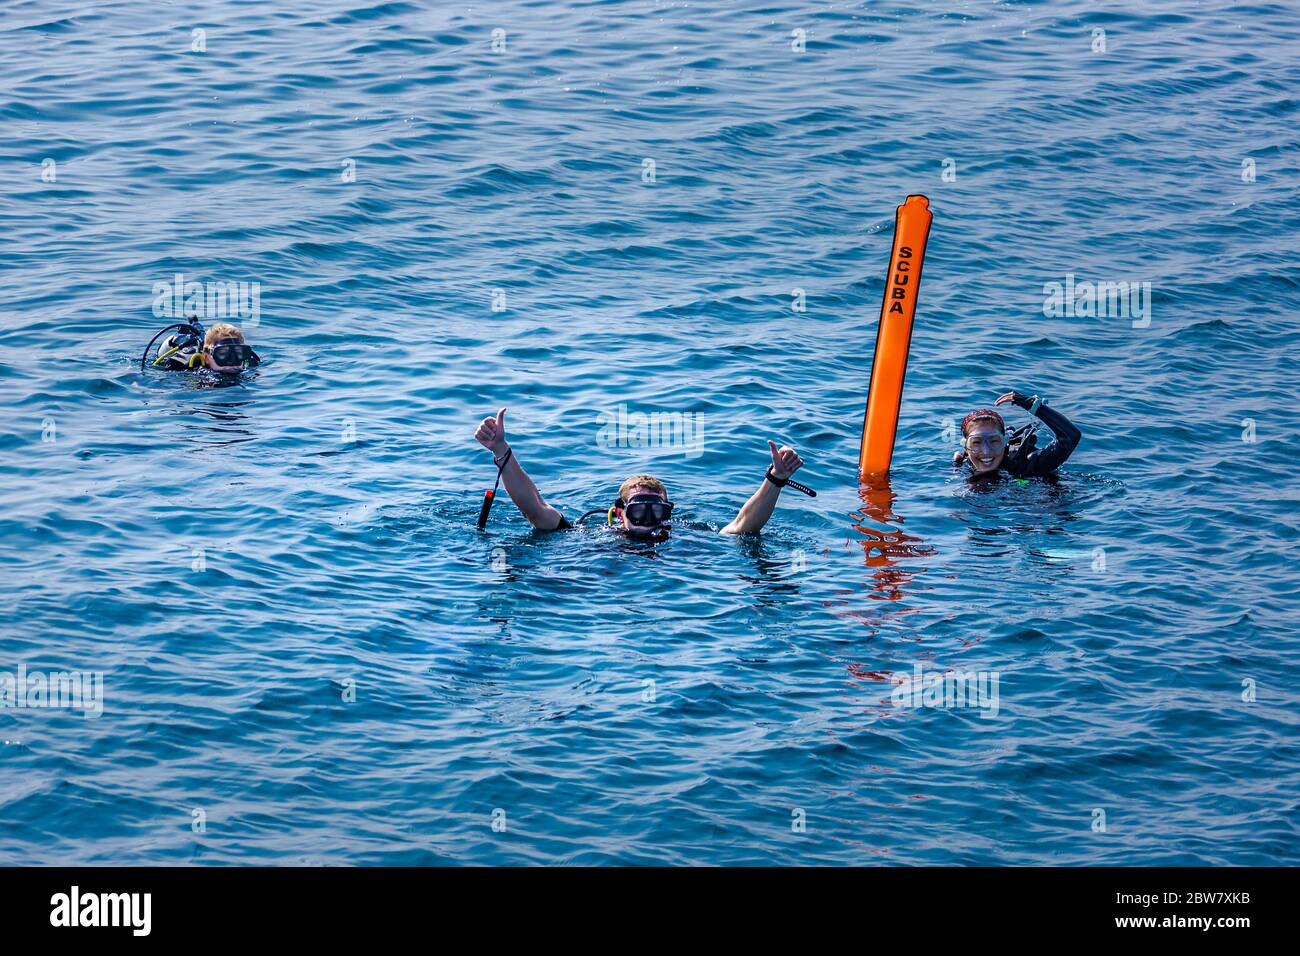 Scuba divers makes the ok sign in tropical sea. Scuba sign, surface marker buoy. Surface of the blue ocean, team of divers on surface of the sea Stock Photo